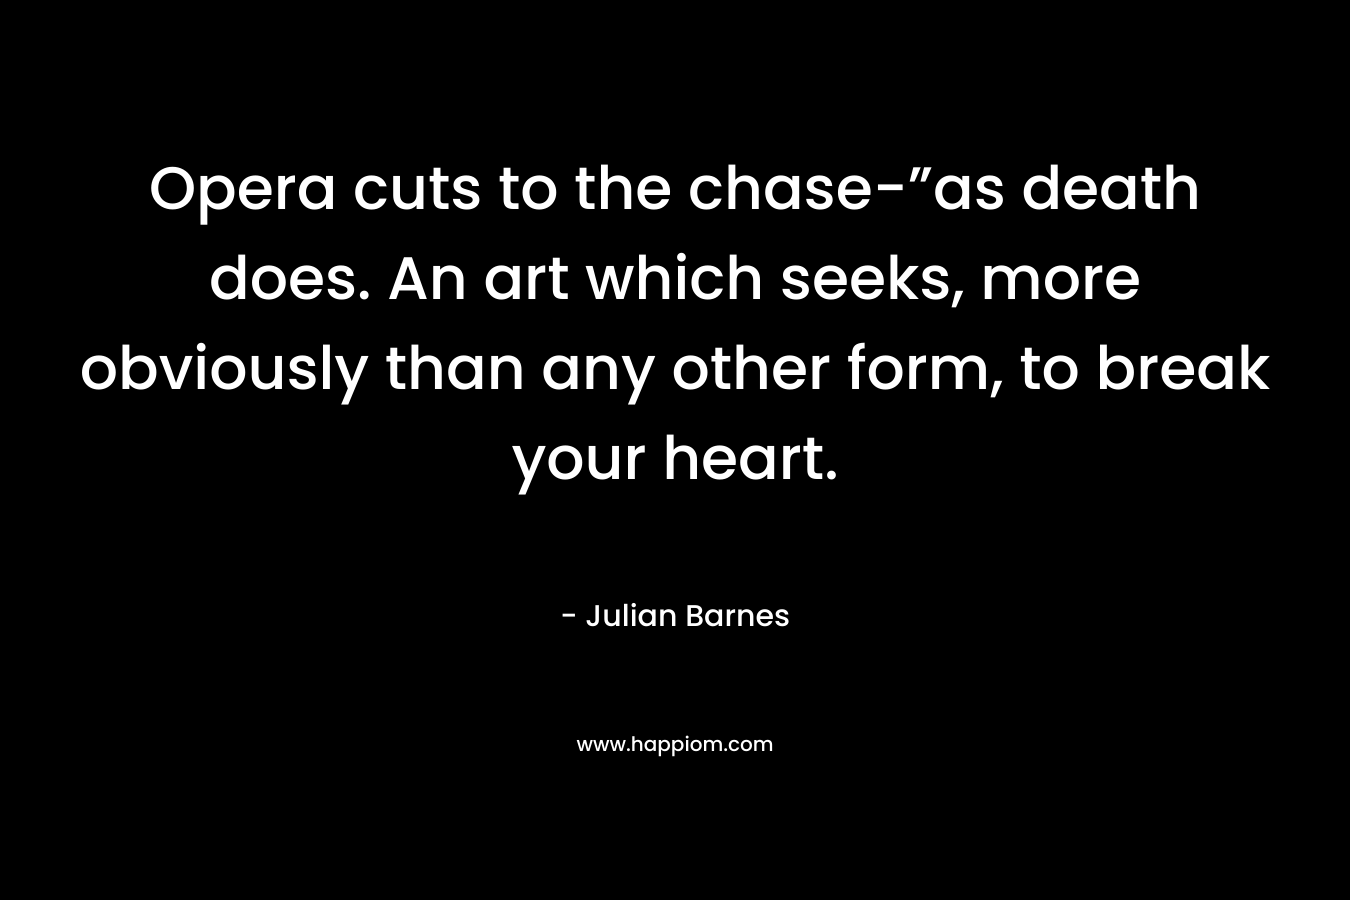 Opera cuts to the chase-”as death does. An art which seeks, more obviously than any other form, to break your heart. – Julian Barnes